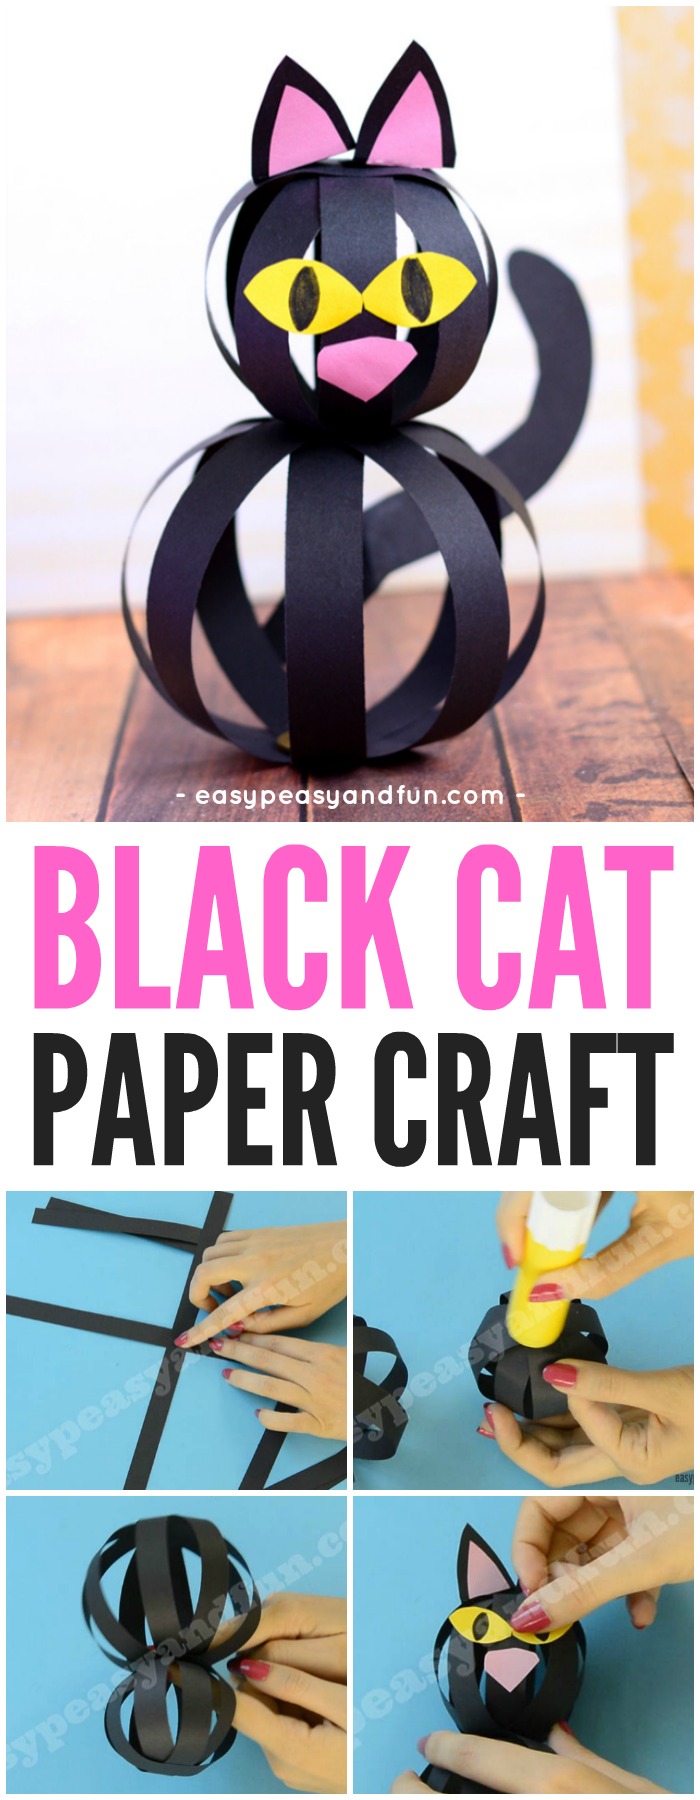 Children's black cat crafts with paper strips